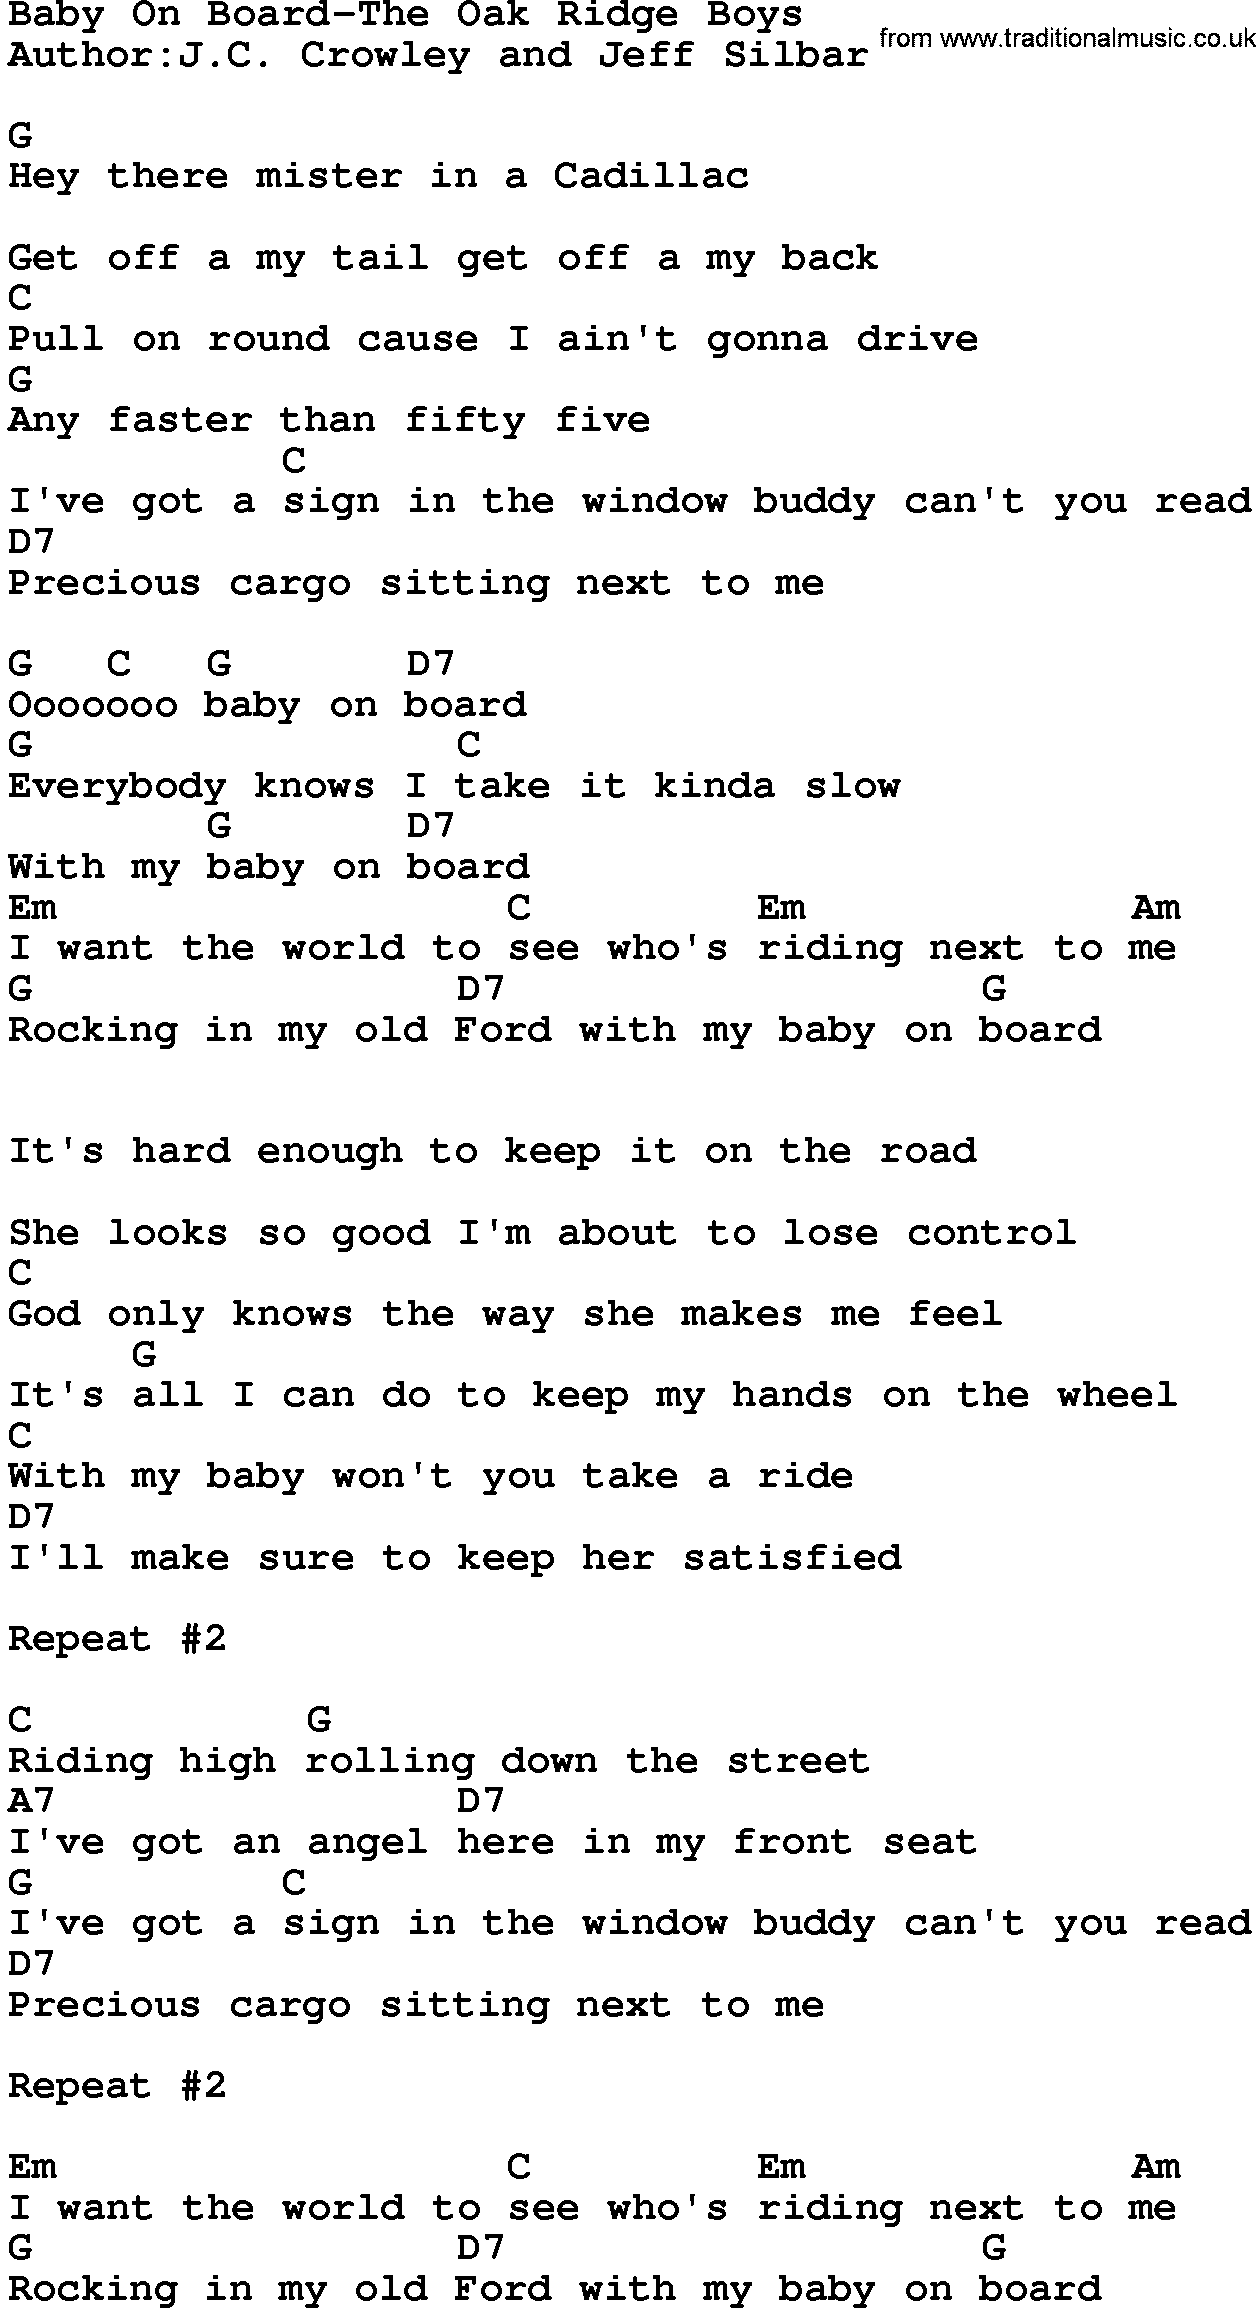 Country music song: Baby On Board-The Oak Ridge Boys lyrics and chords